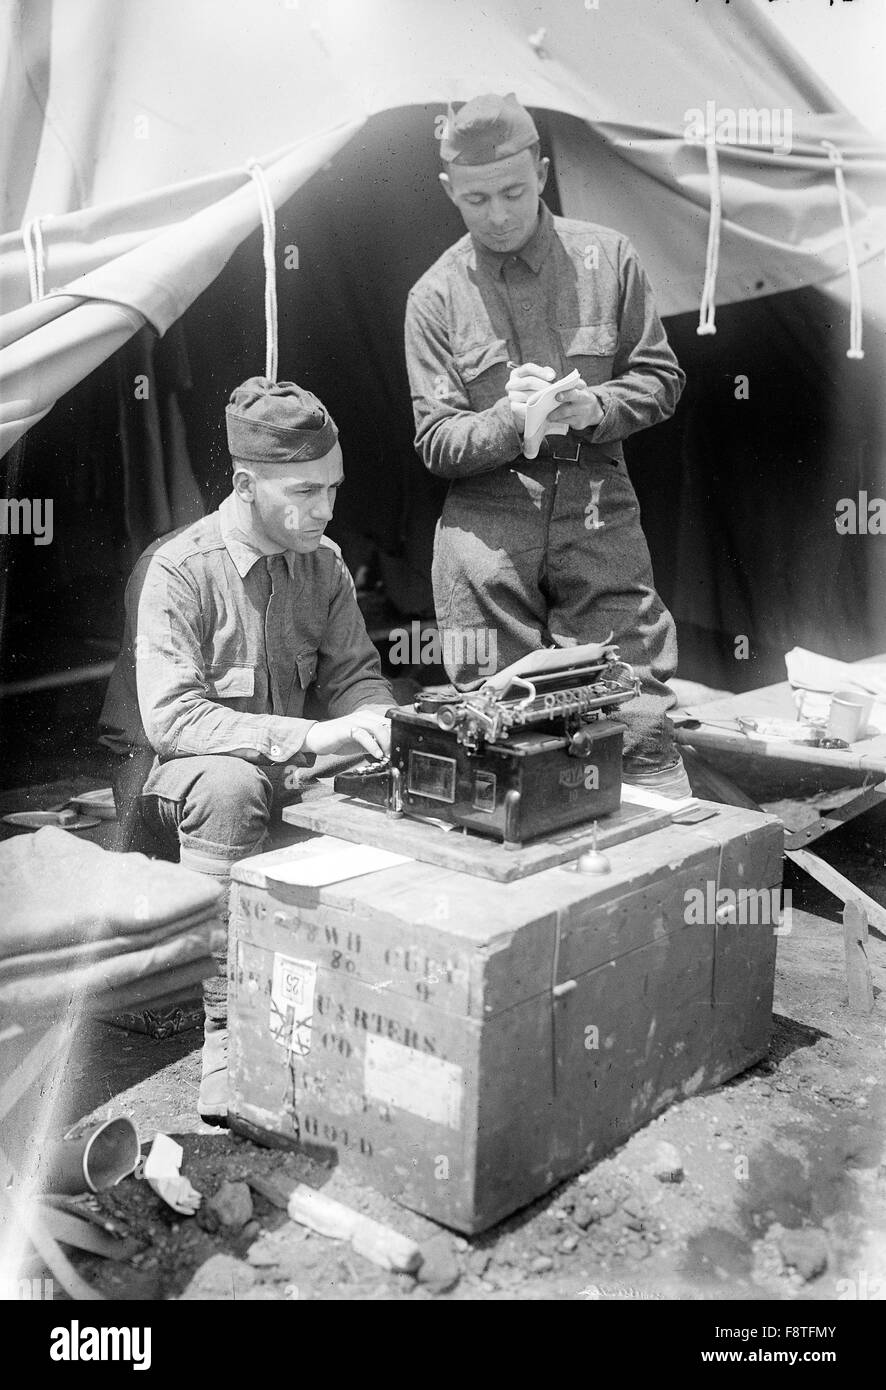 Soldiers work at a typewriter Stock Photo